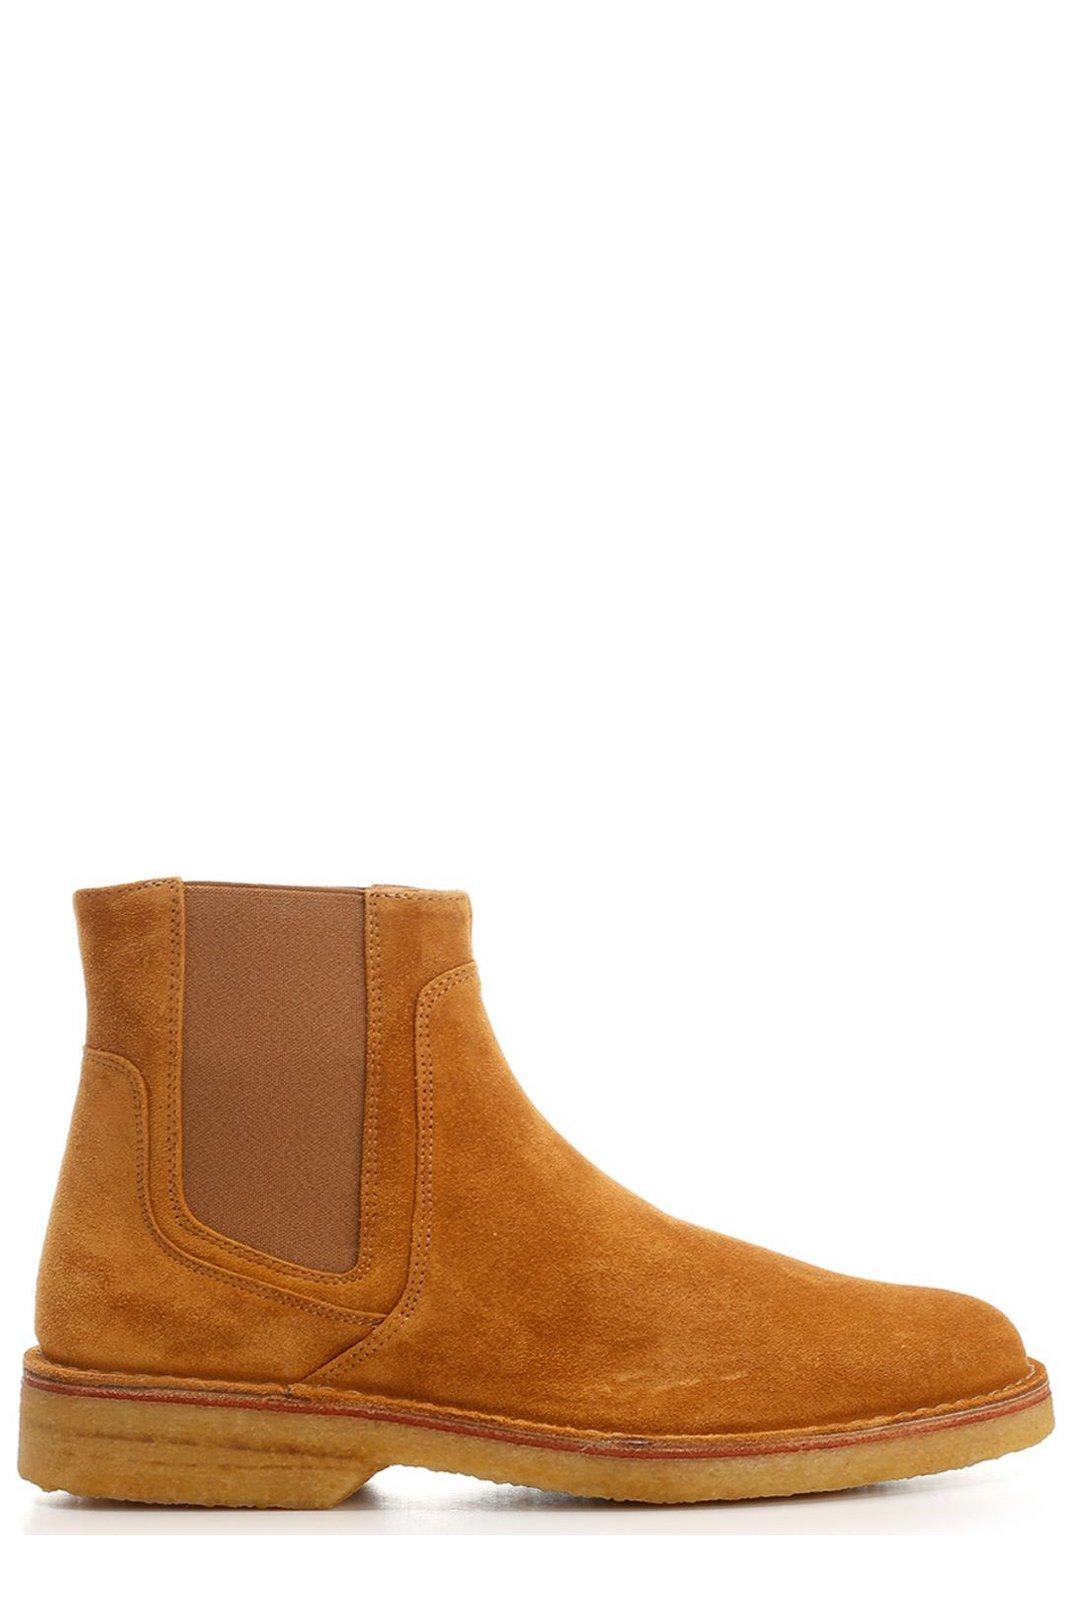 Shop Apc Pointed-toe Ankle Boots In Caf Caramel